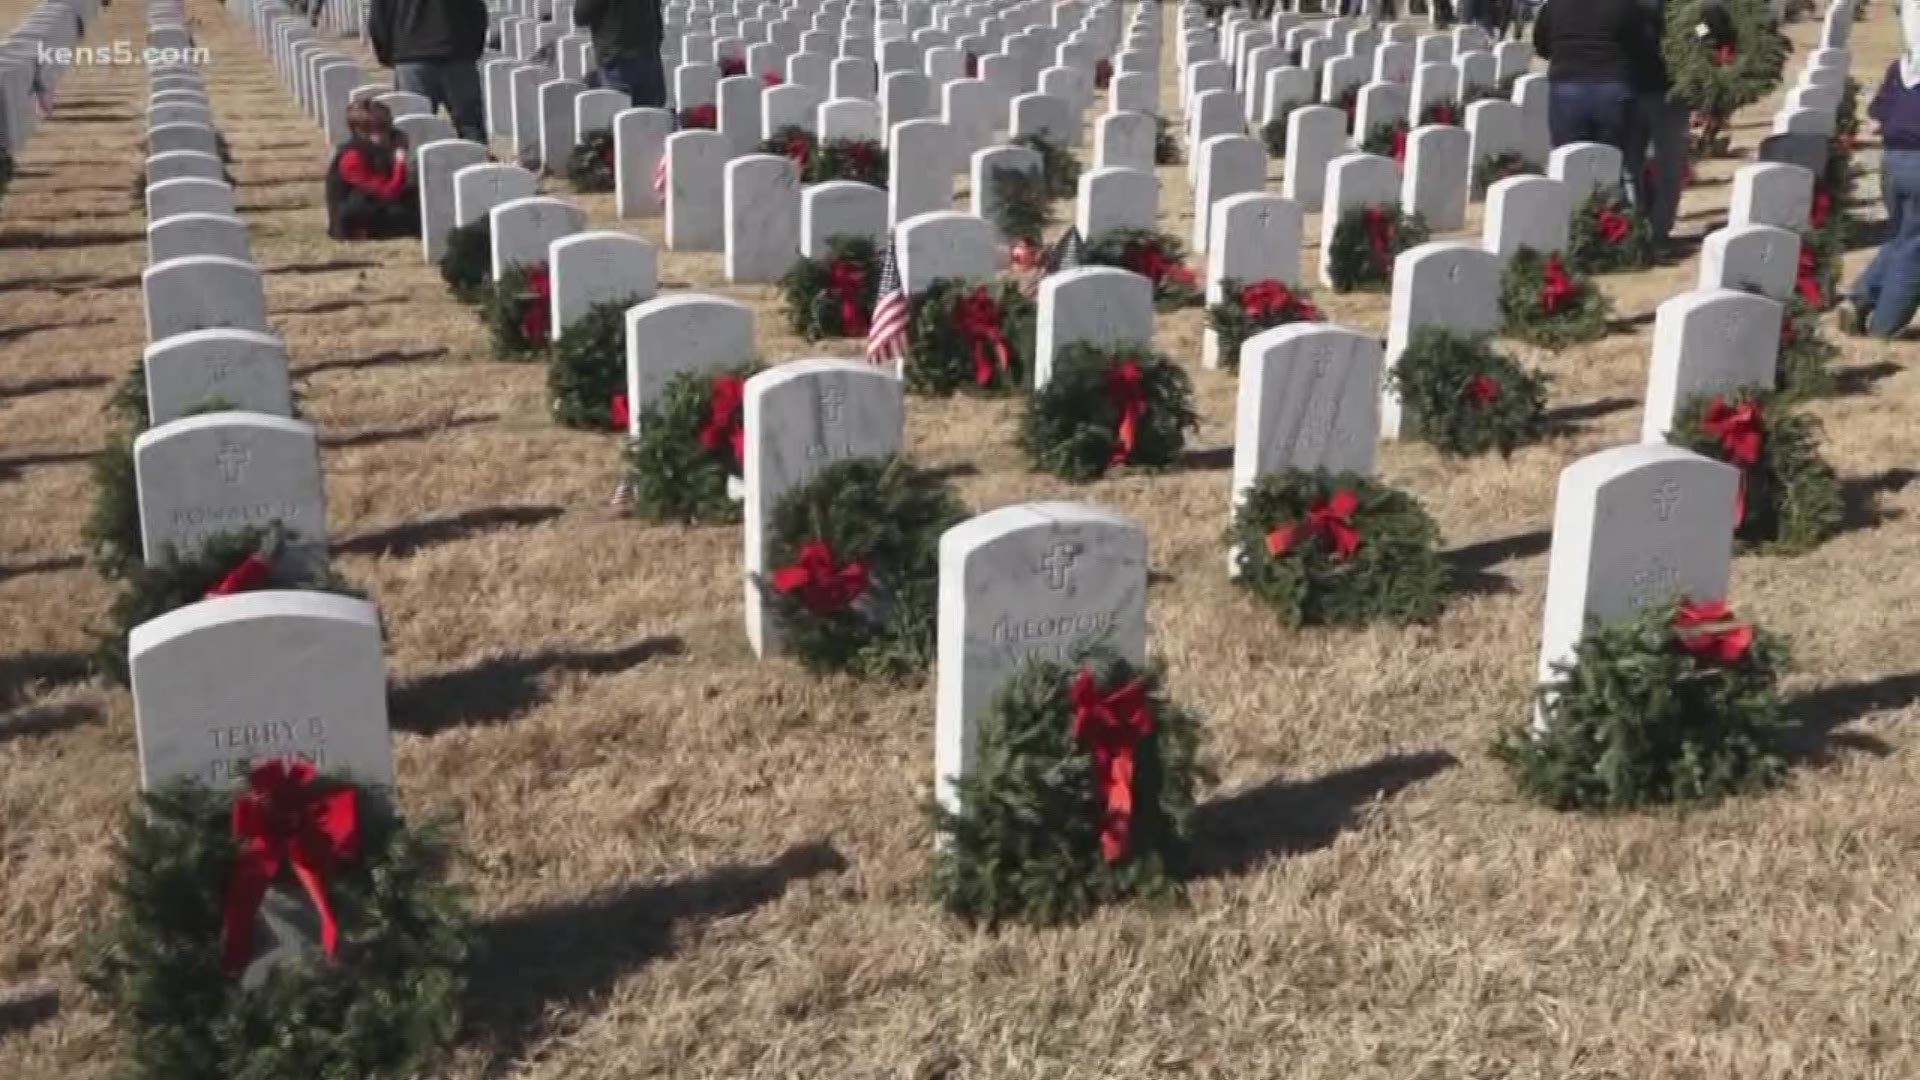 An event 12 years in the making. Wreaths Across America continued its campaign today by donating wreaths in tribute of Veterans laid to rest at cemeteries across America, including at Fort Sam Houston. The tradition began in 2006 and is now in its 13th ye